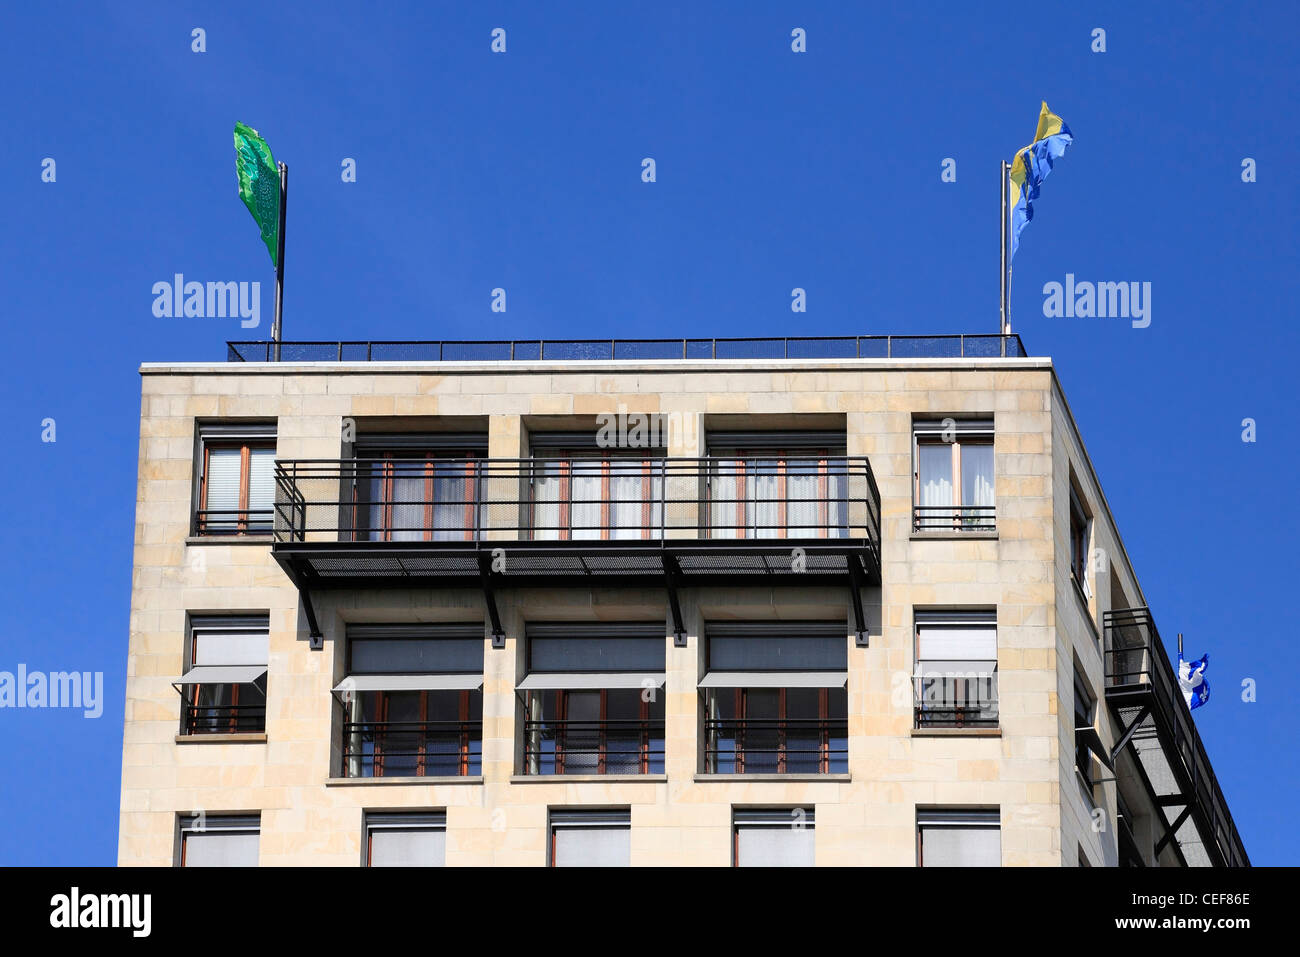 'Palais' at Pariser Platz (Paris Square), Berlin, Germany. Modern office- and residential building, detail. Stock Photo